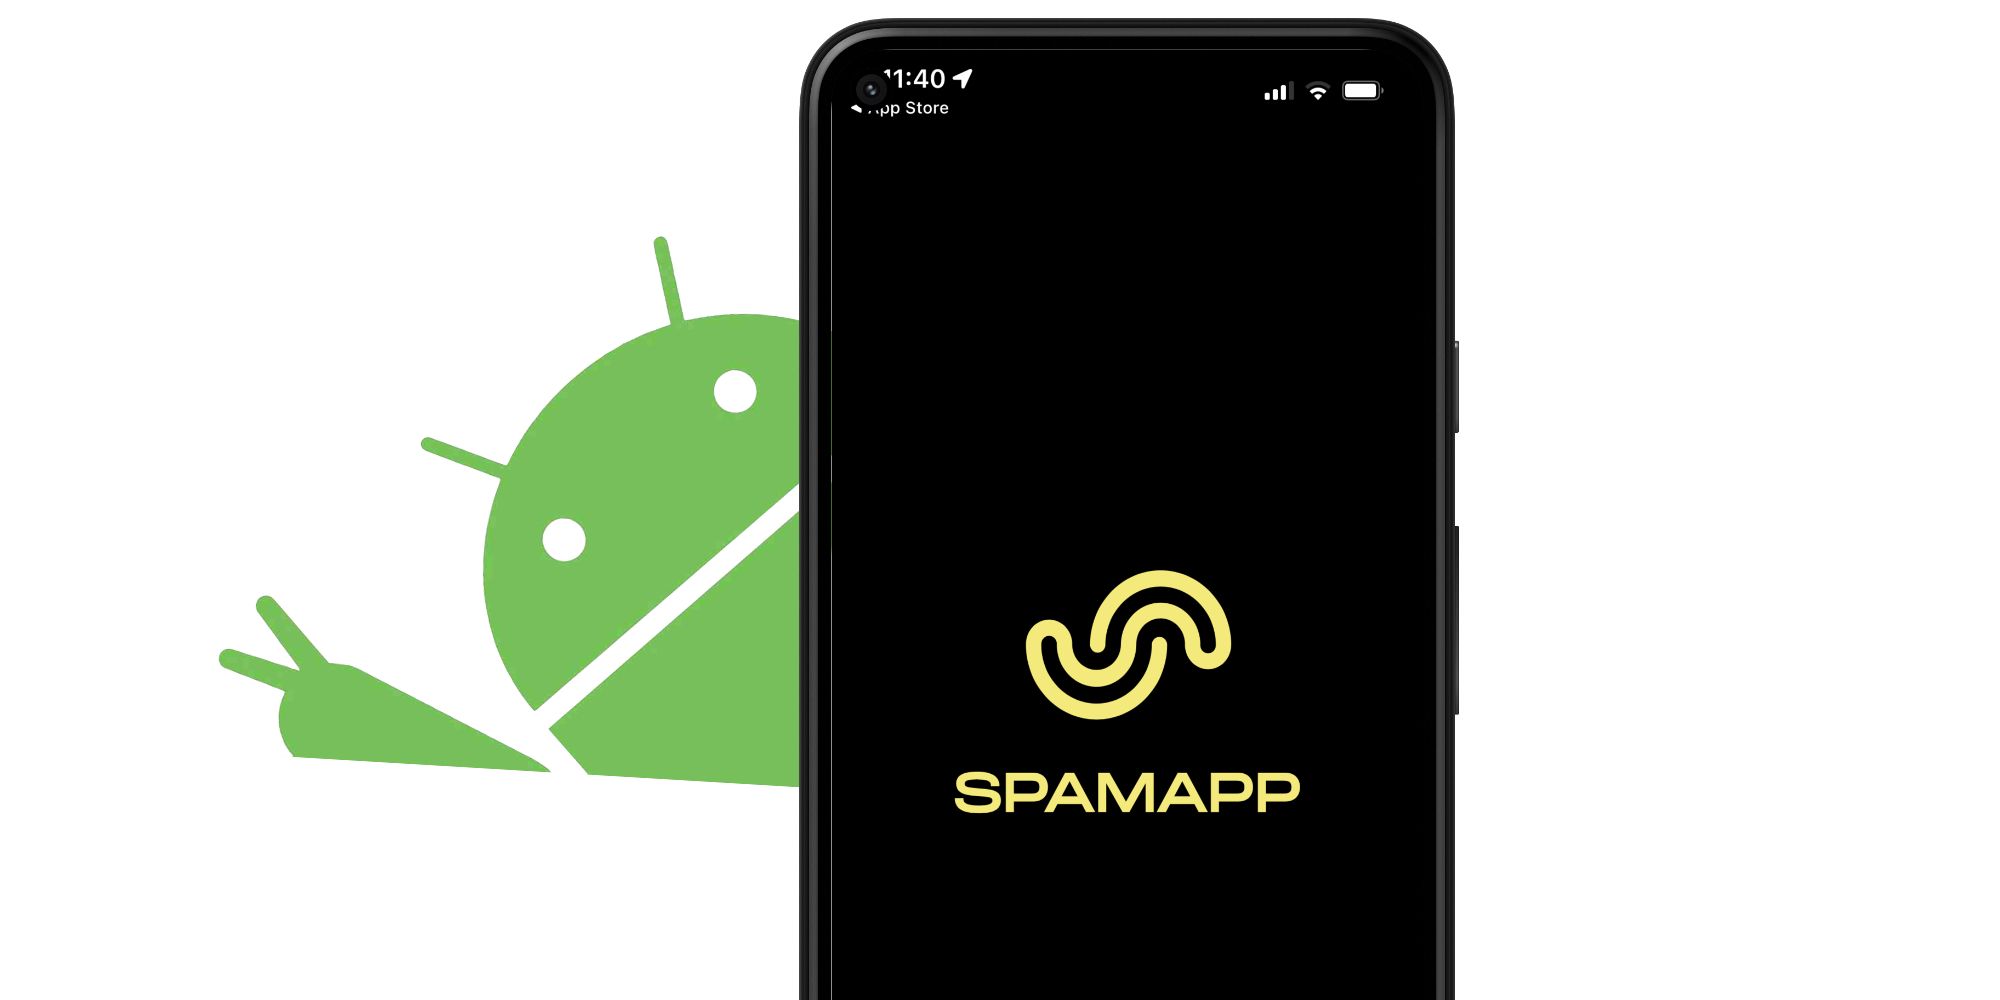 Spam App and the Android logo